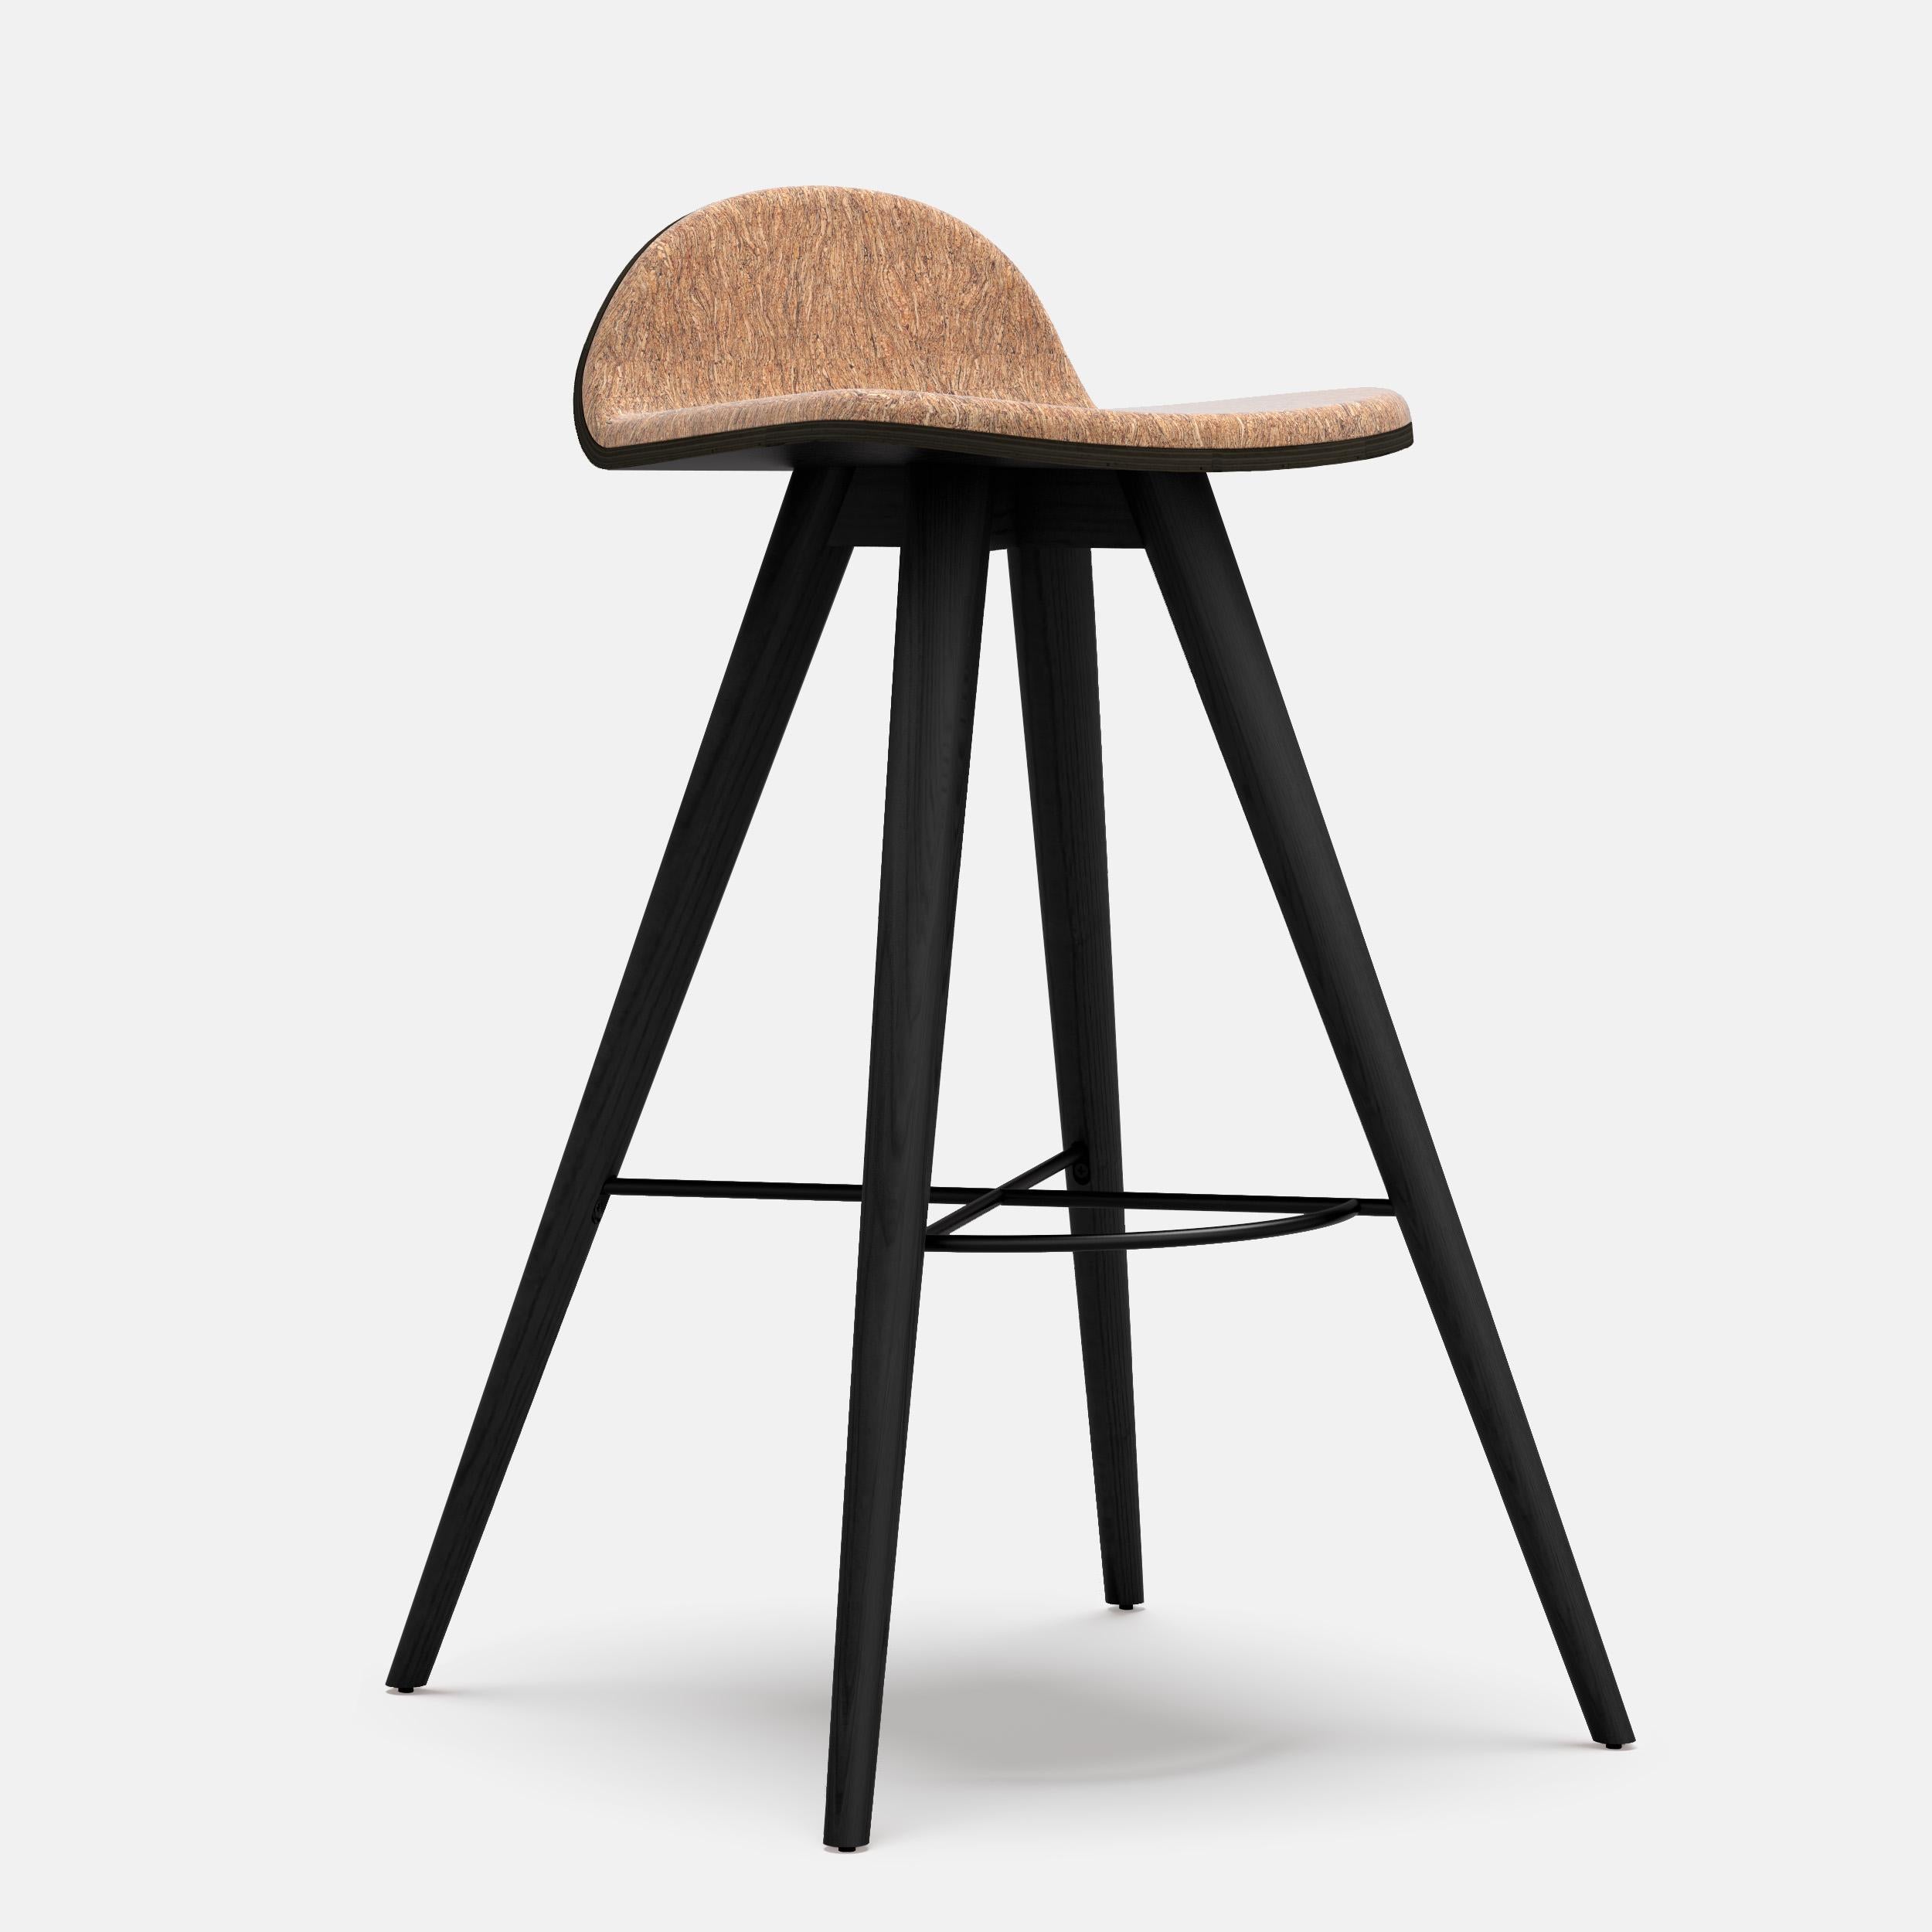 Painted ash and fabric contemporary counter stool by Alexandre Caldas
Dimensions: W 49 x D 46 x H 79 cm
Materials: Painted black ash, corkfabric

Structure also available in beech, ash, oak, mix wood
Seat also available in fabric, leather,